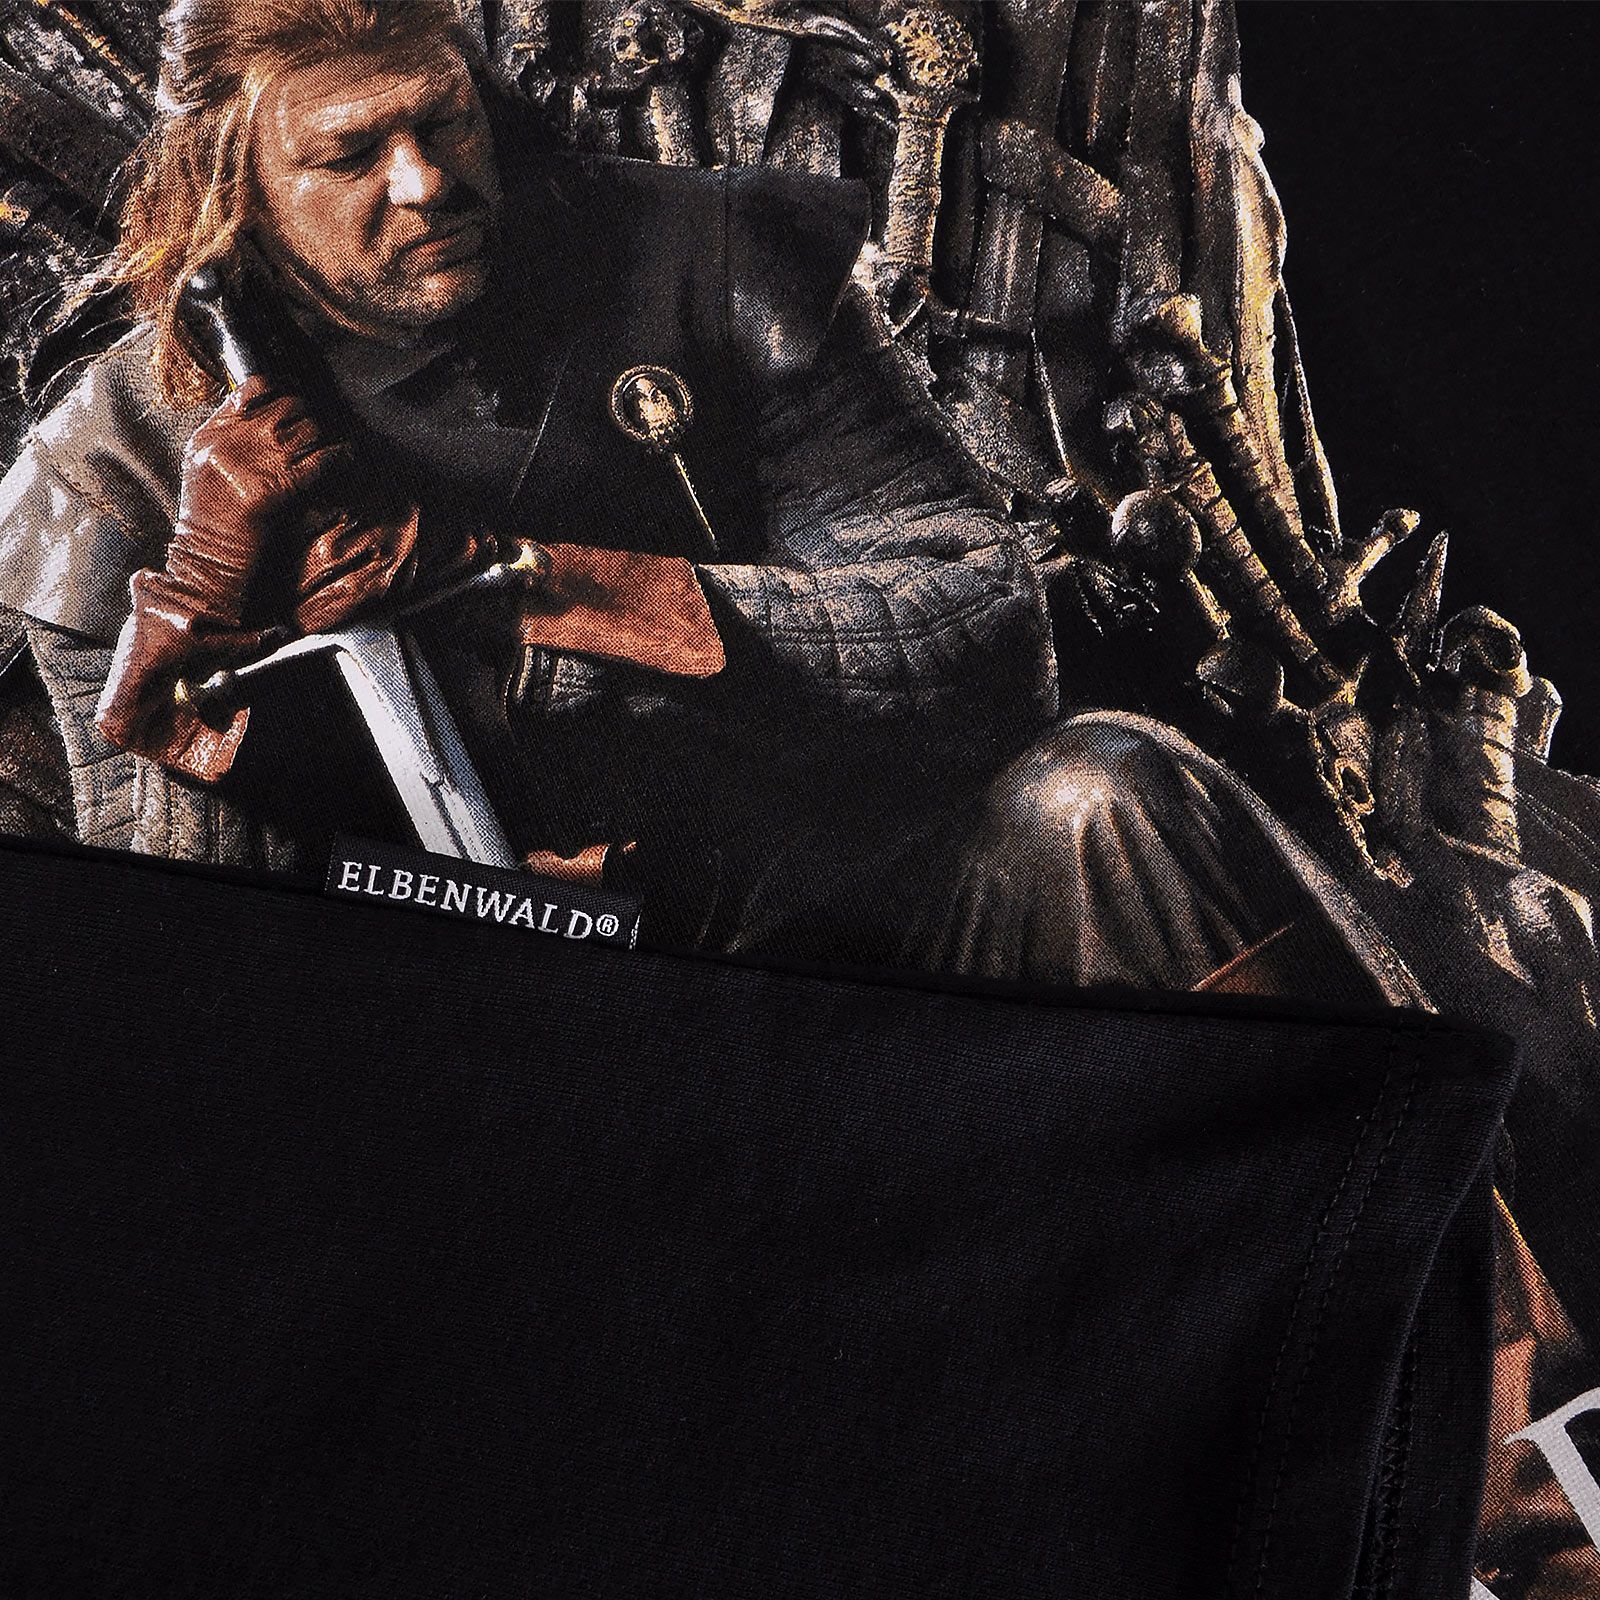 T-shirt Ned Stark Lord of Winterfell - Game of Thrones